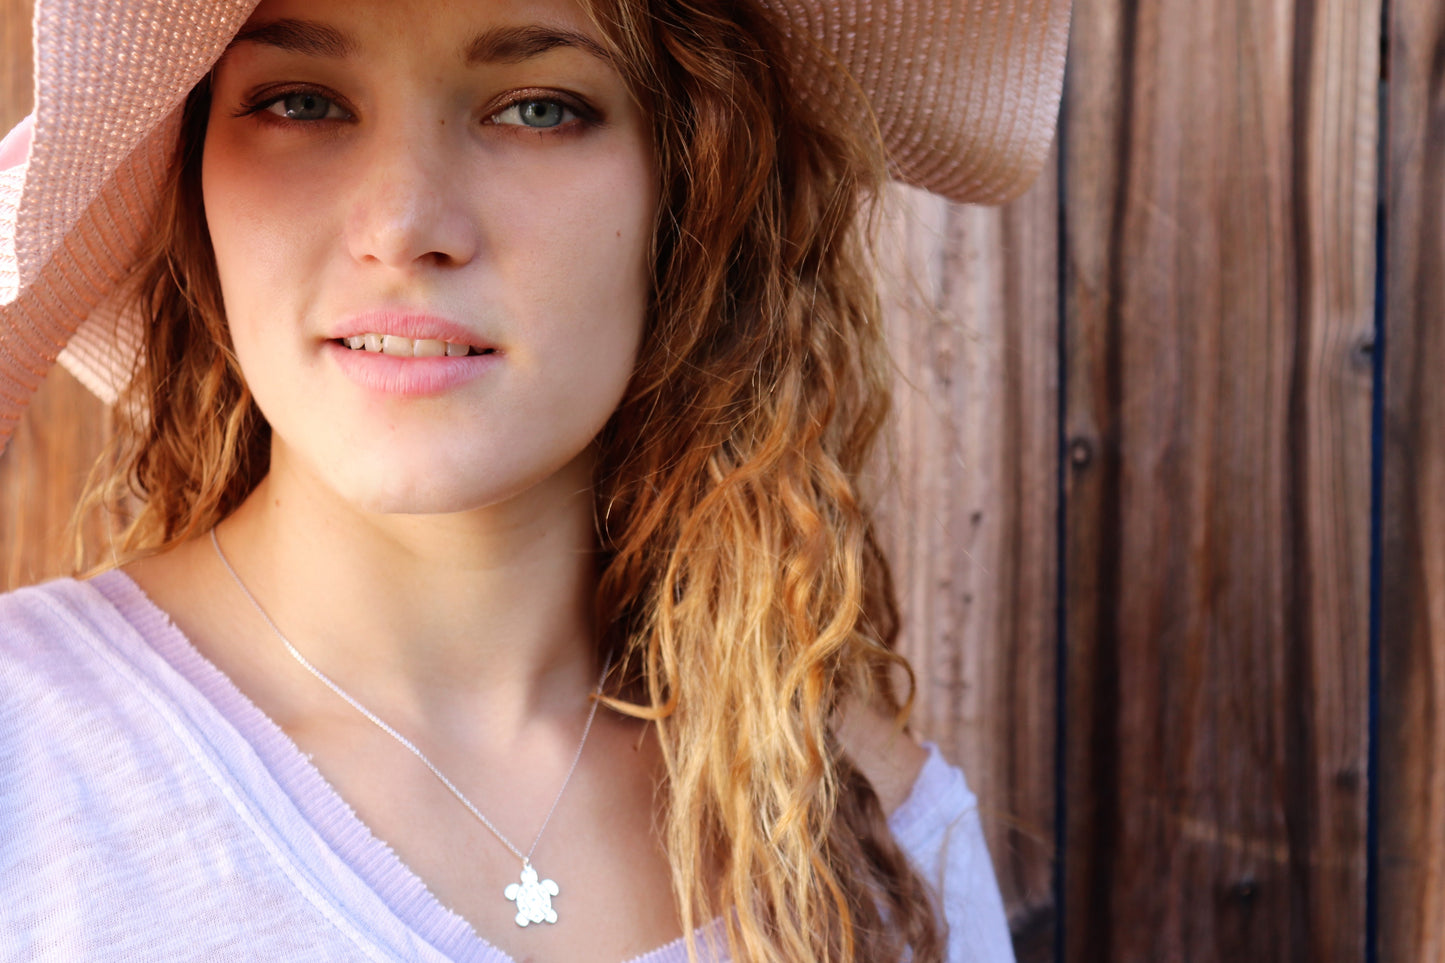 Diamond turtle necklace on woman wearing a straw hat and t-shirt